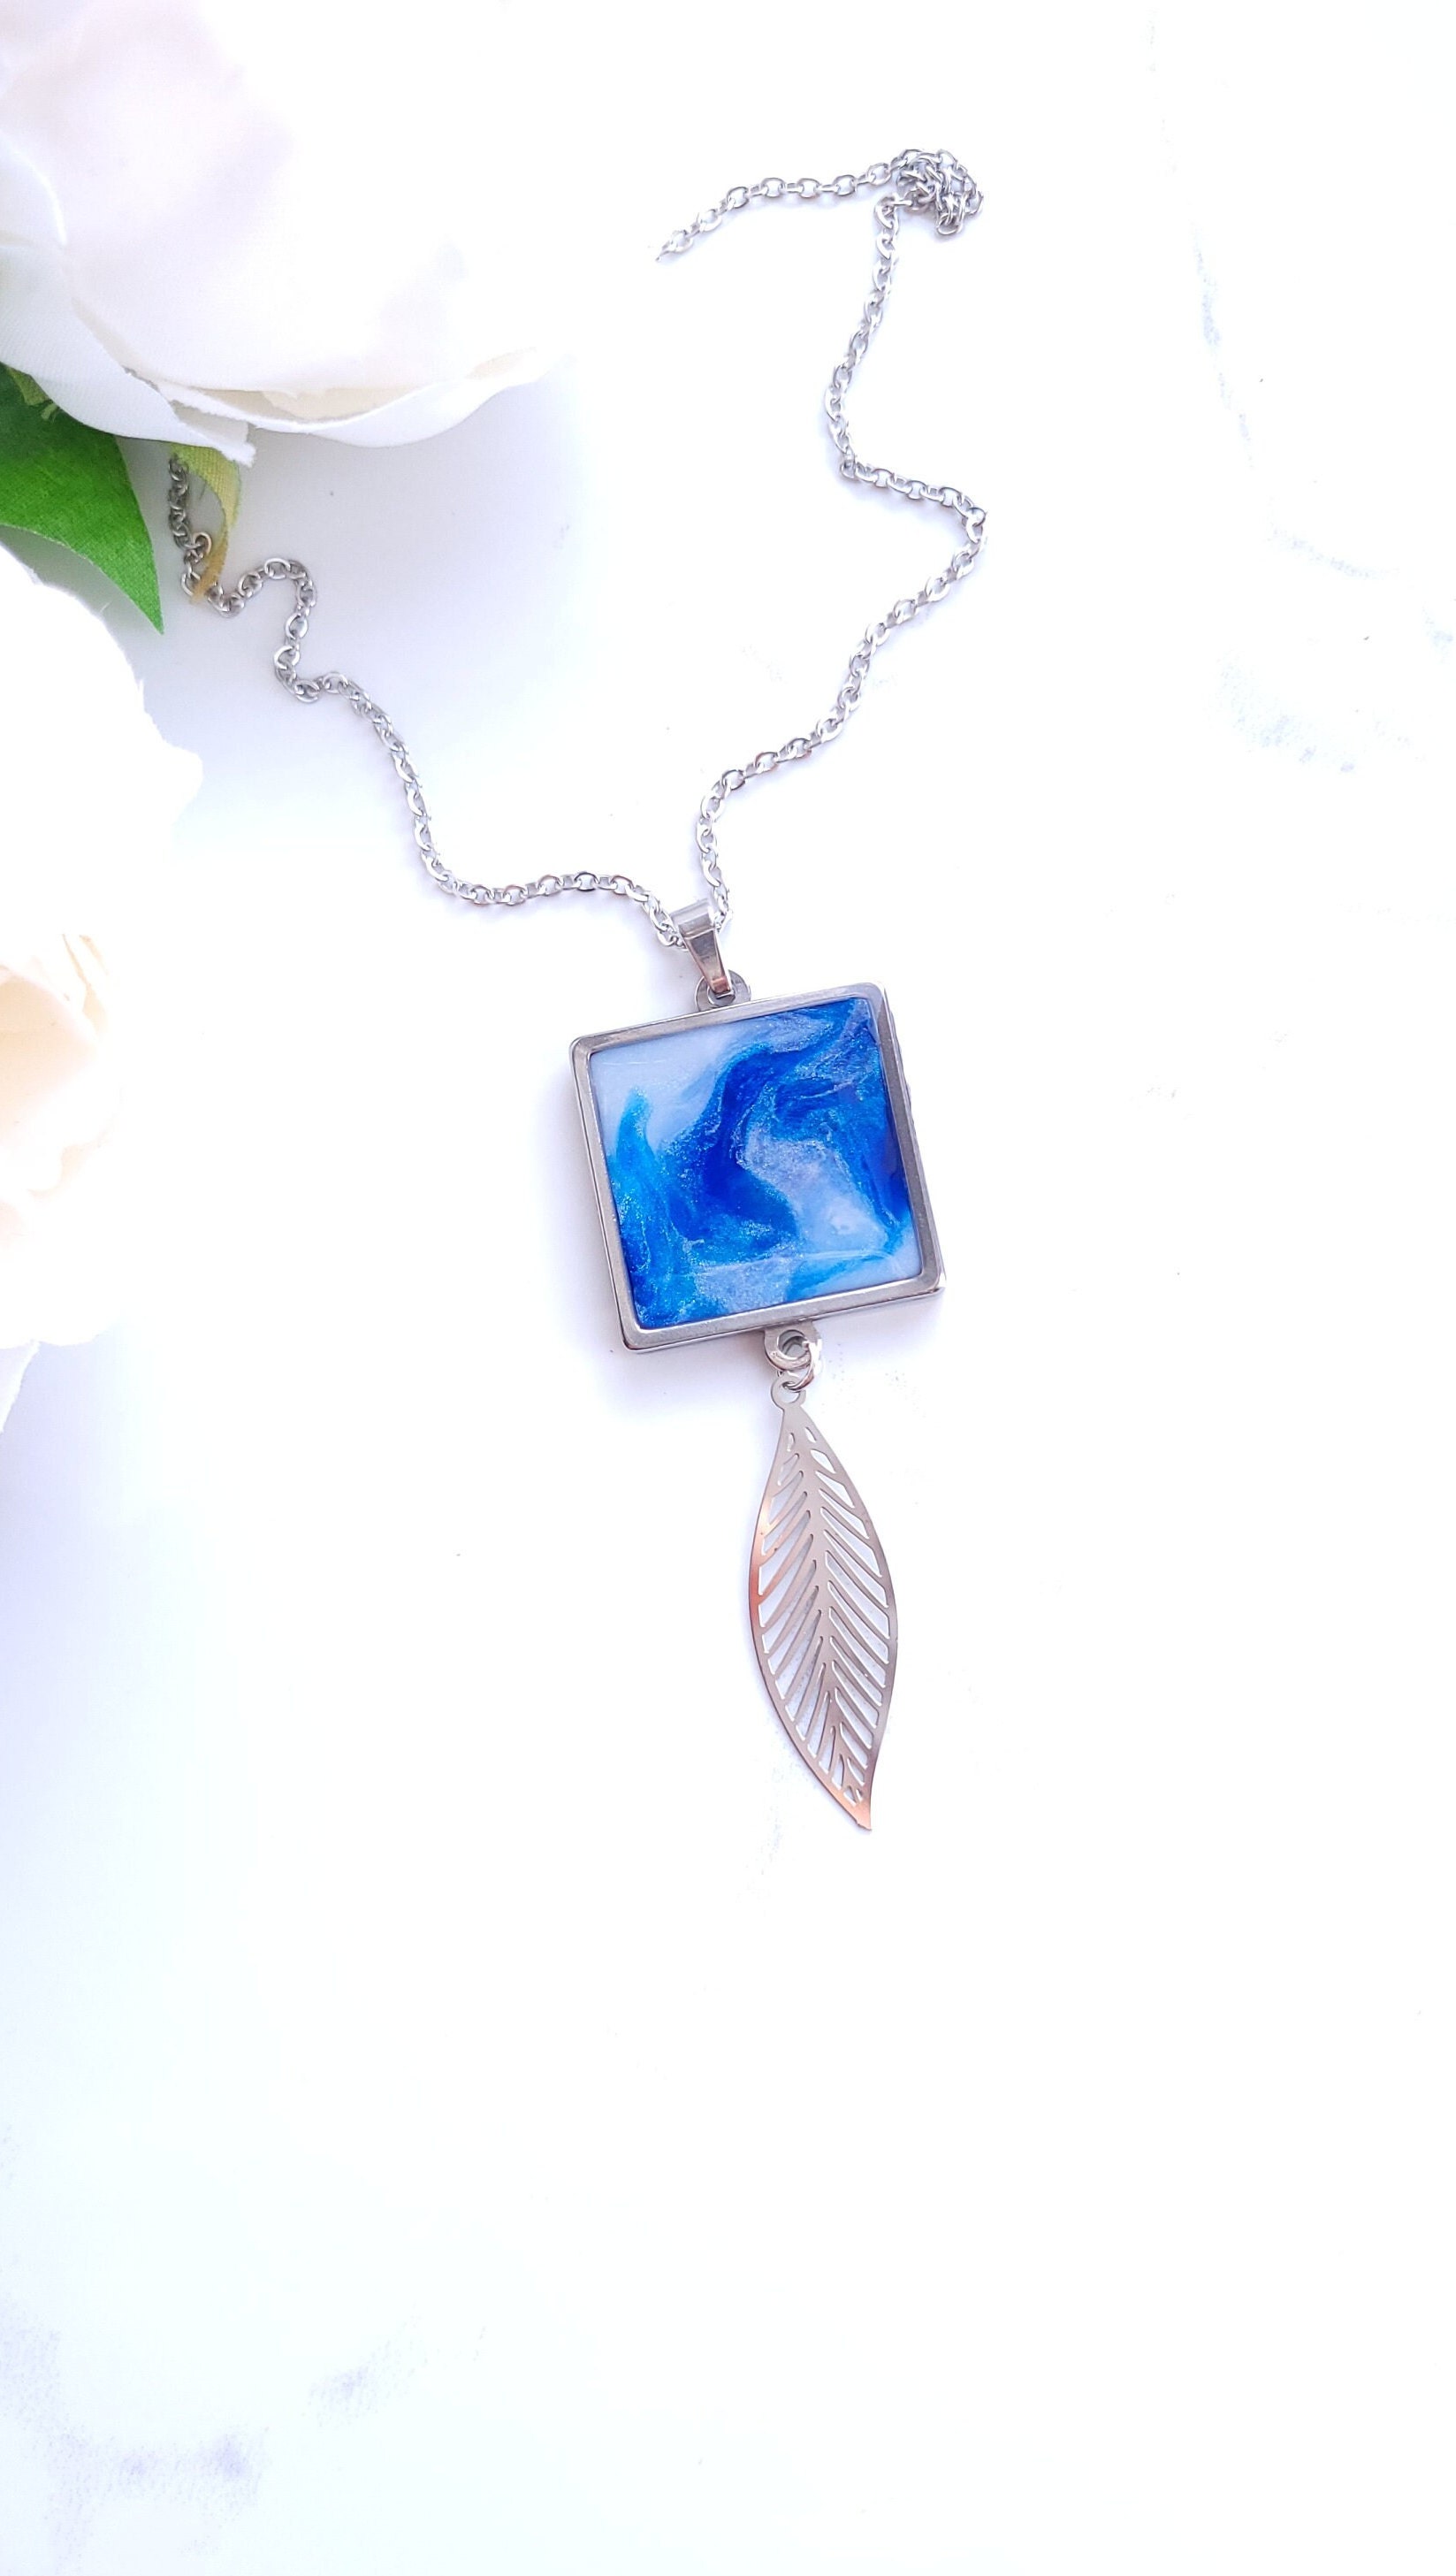 Blue, White & Pearl Marble Pendant Necklace | Handmade Polymer Clay Unique